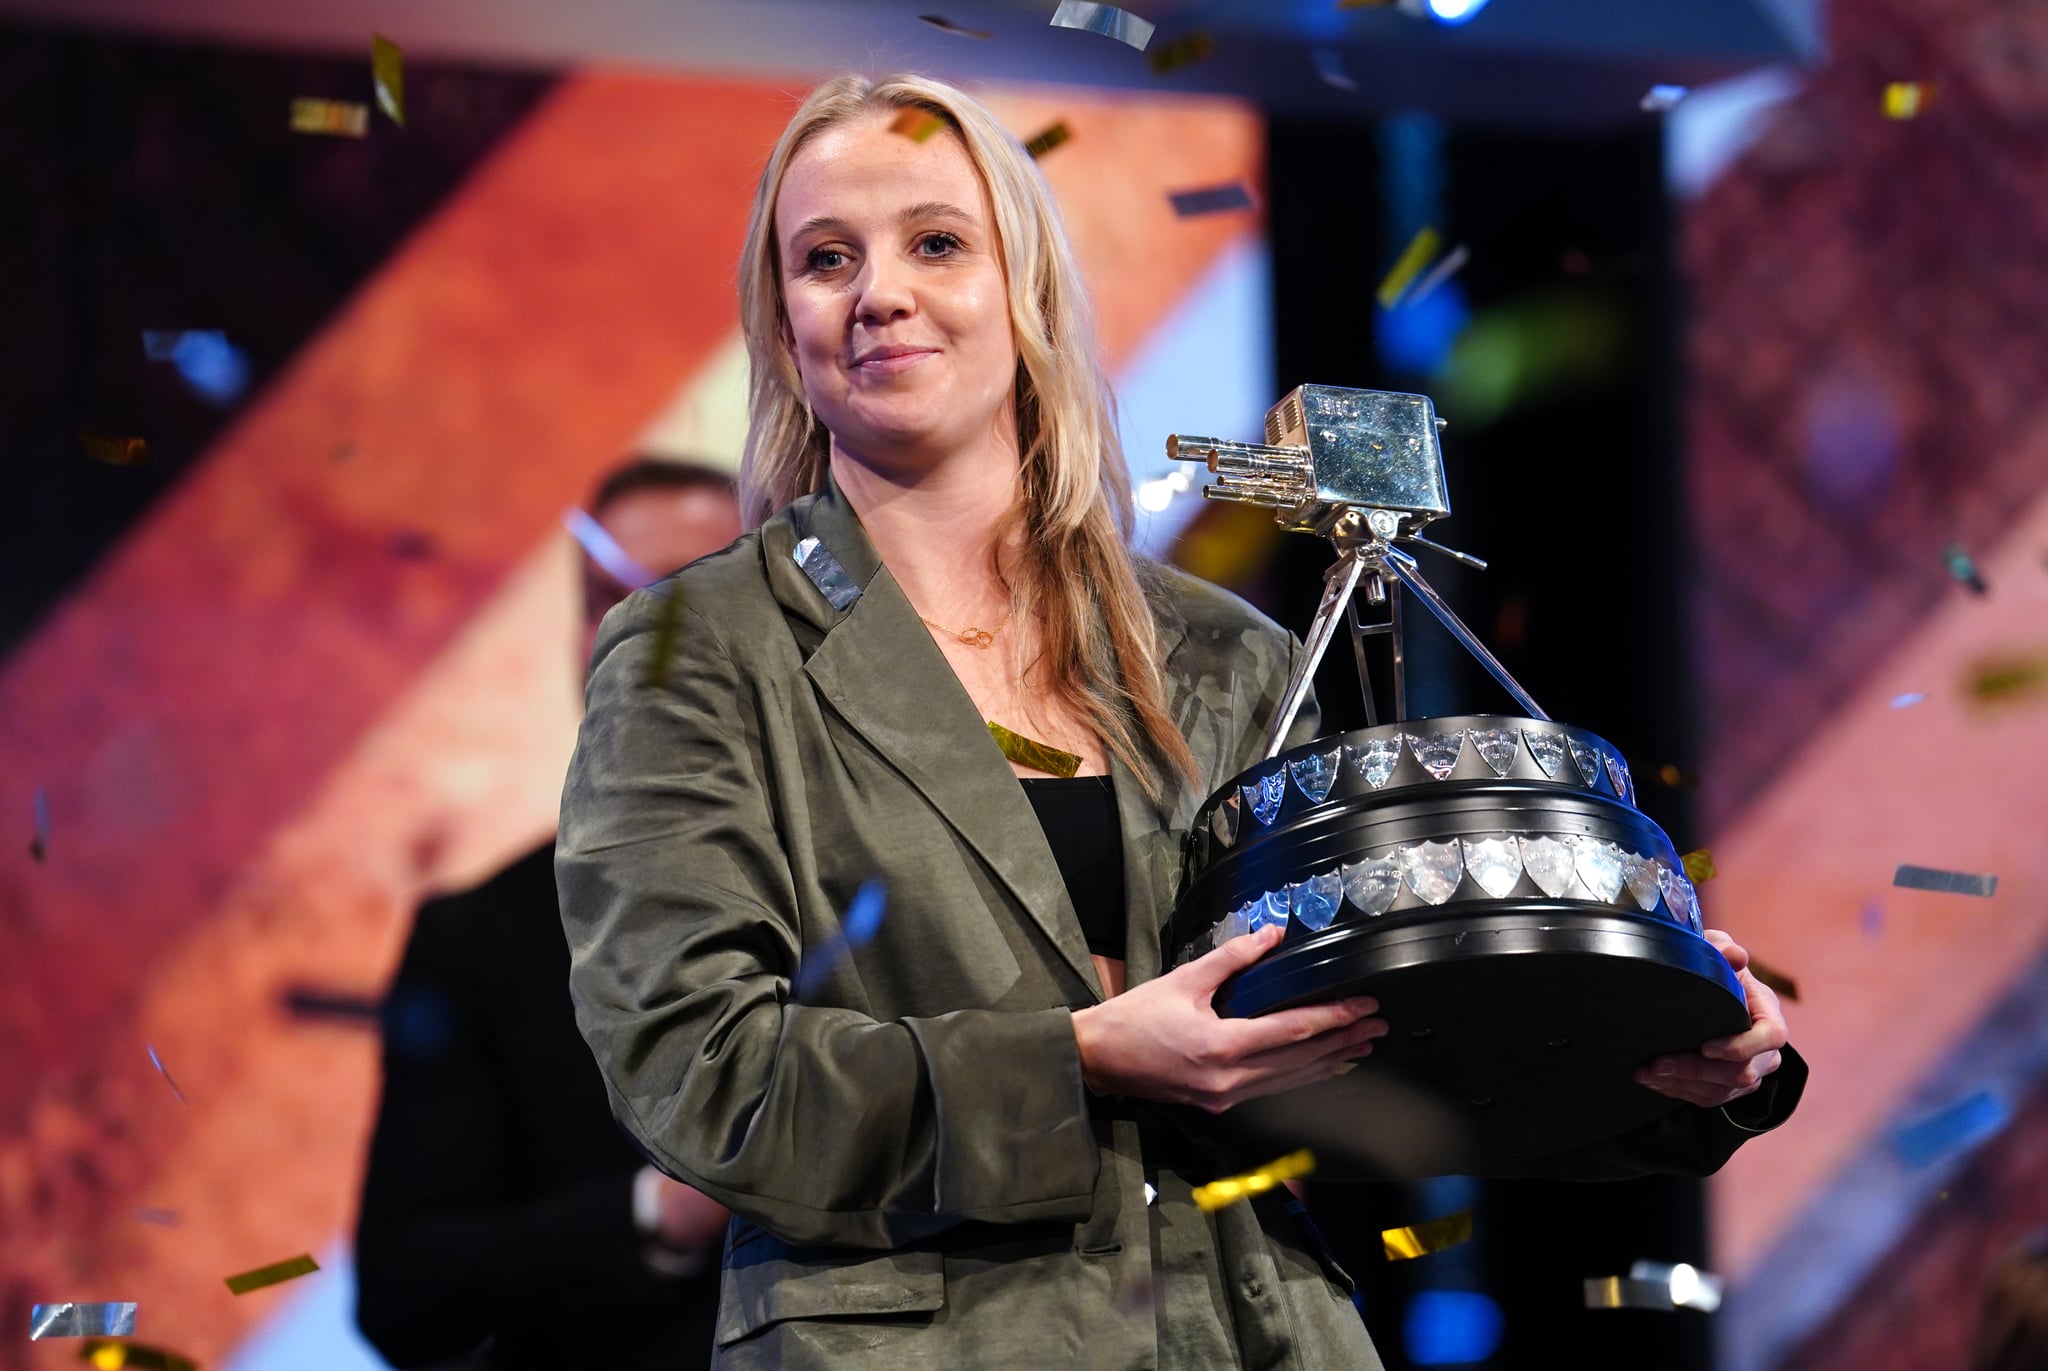 Beth Mead poses with The BBC Sports Personality of the Year Award during the BBC Sports Personality of the Year Awards 2022 held at MediaCityUK, Salford. Picture date: Wednesday December 21, 2022. (Photo by David Davies/PA Images via Getty Images)